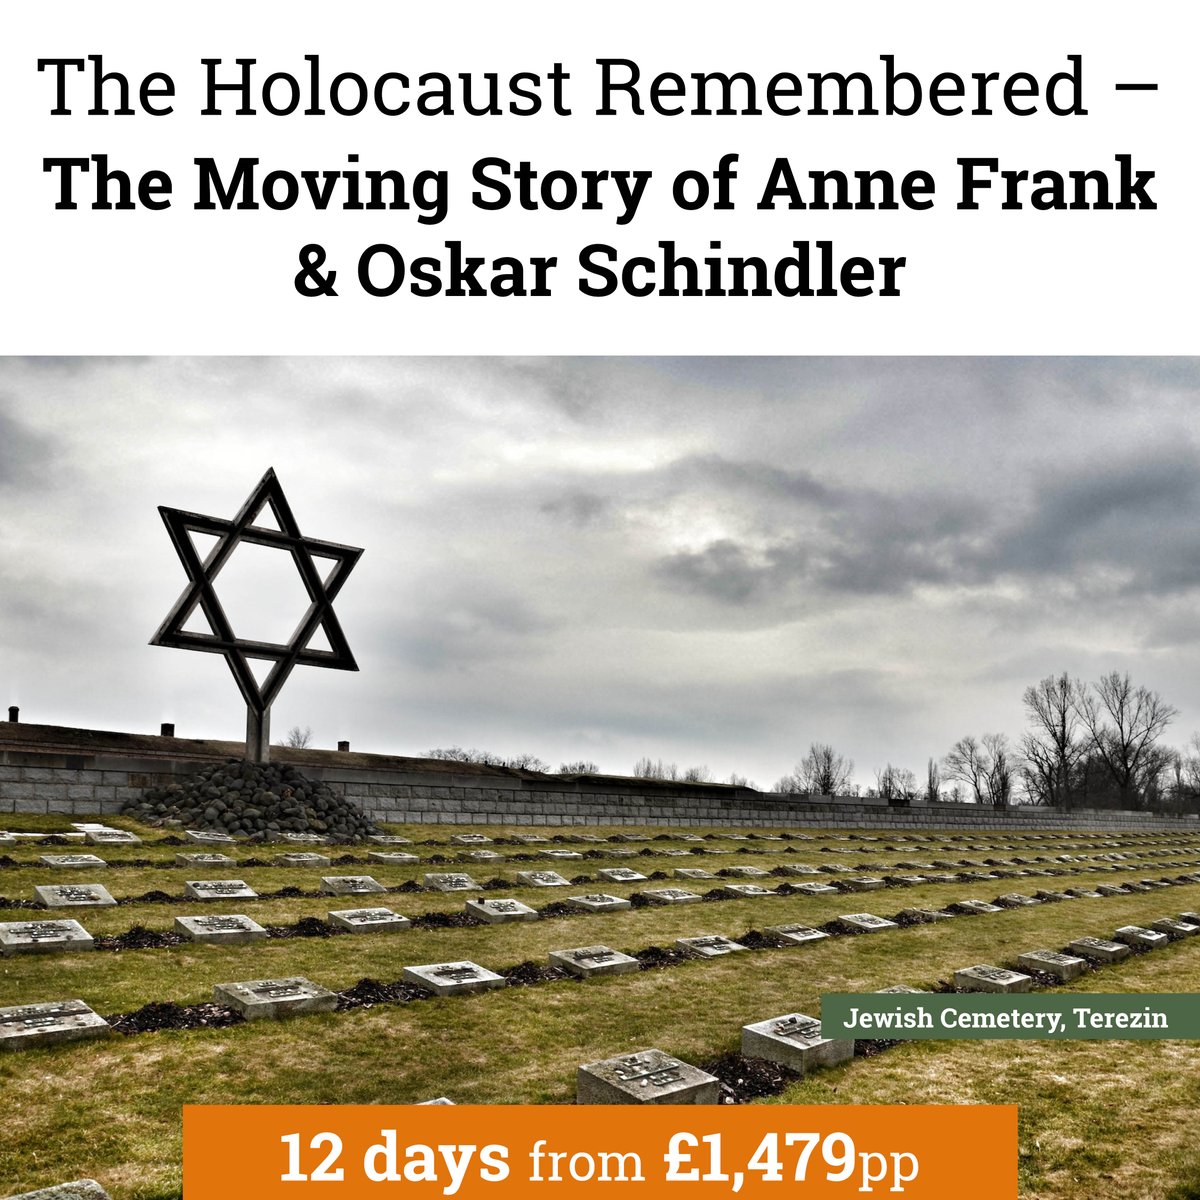 Tracing the story of Anne Frank, join us on this tour alongside a Specialist Guide. We visit Auschwitz-Birkenau, Terezin, and the Oskar Schindler Factory, discovering the bravery of Schindler and the resilience of those who faced unthinkable horrors >> ow.ly/pNxG50QrKpM